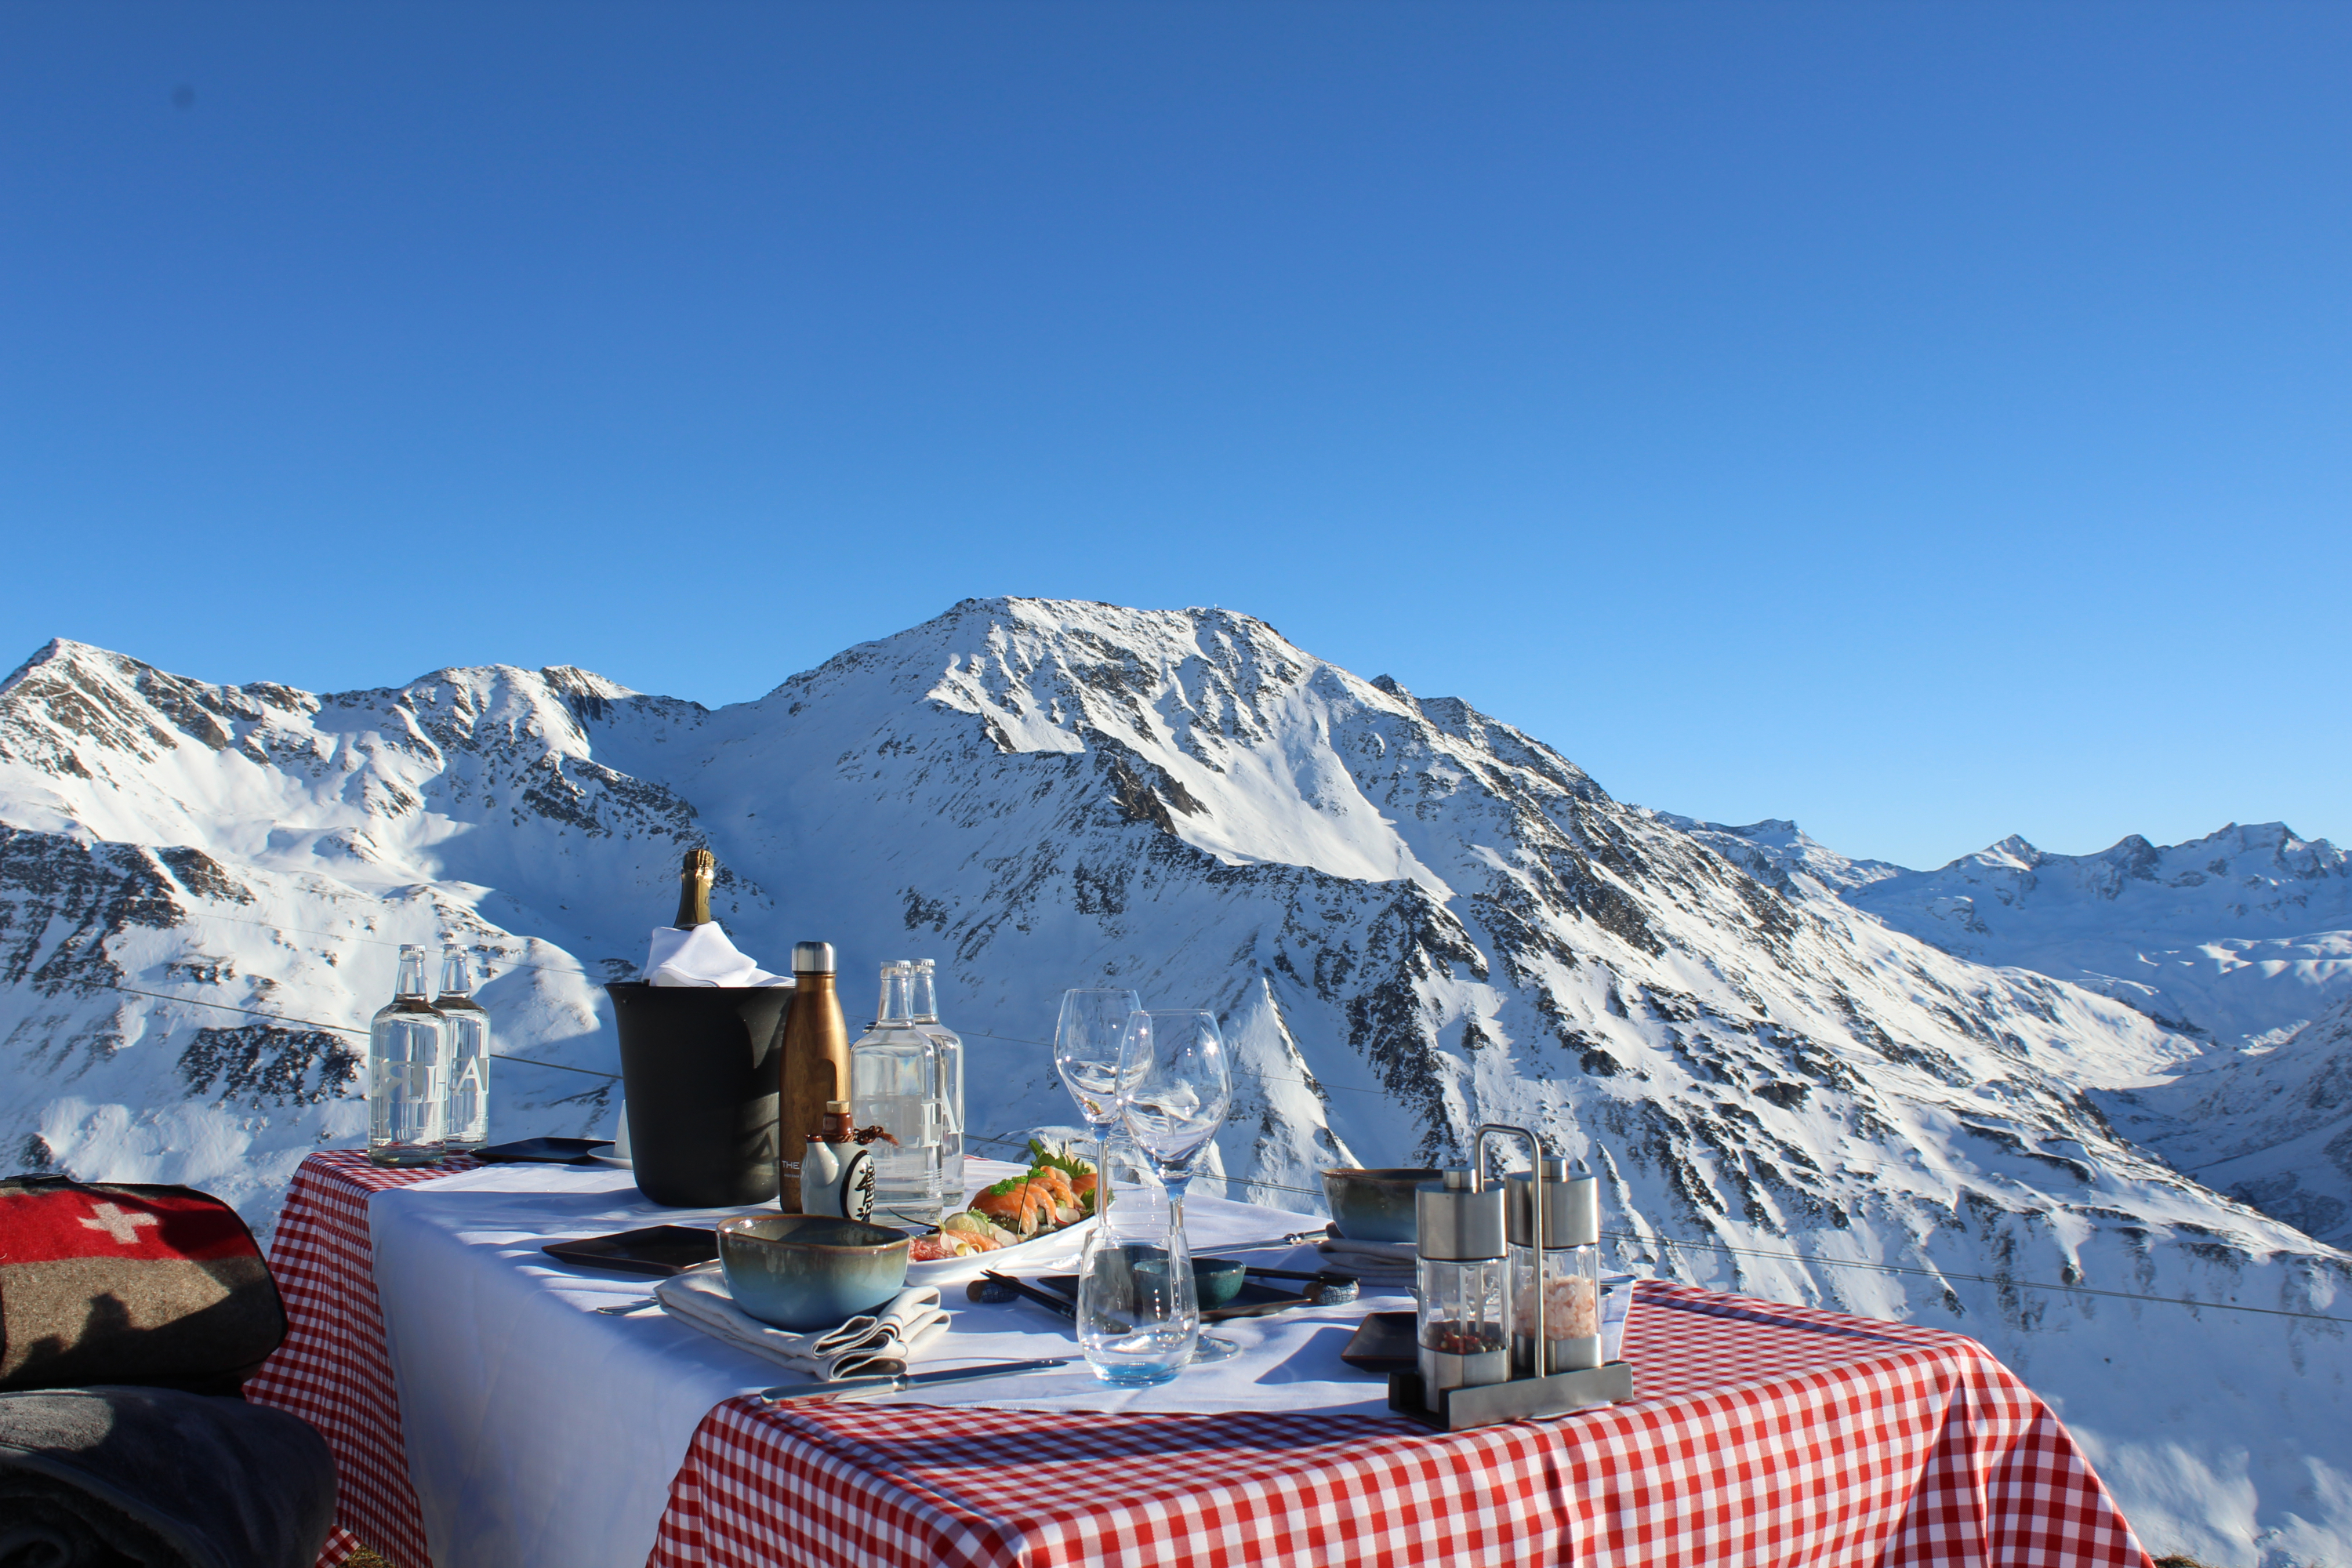 A Gourmet outdoor food setup with stunning mountain view